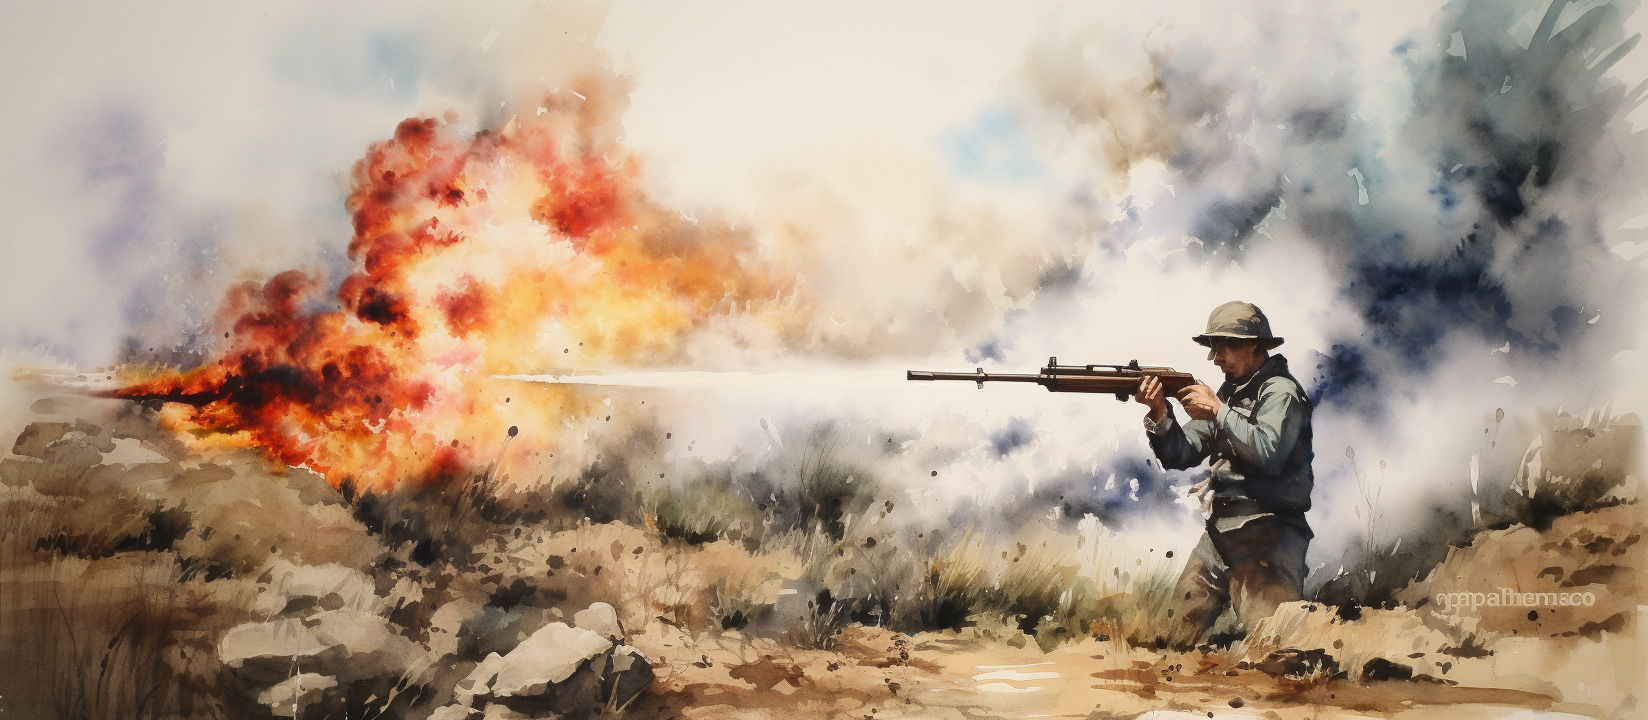 firing_watercolor_painting_783d48f3-9964-4350-9375-c7f5866eb8e4.png